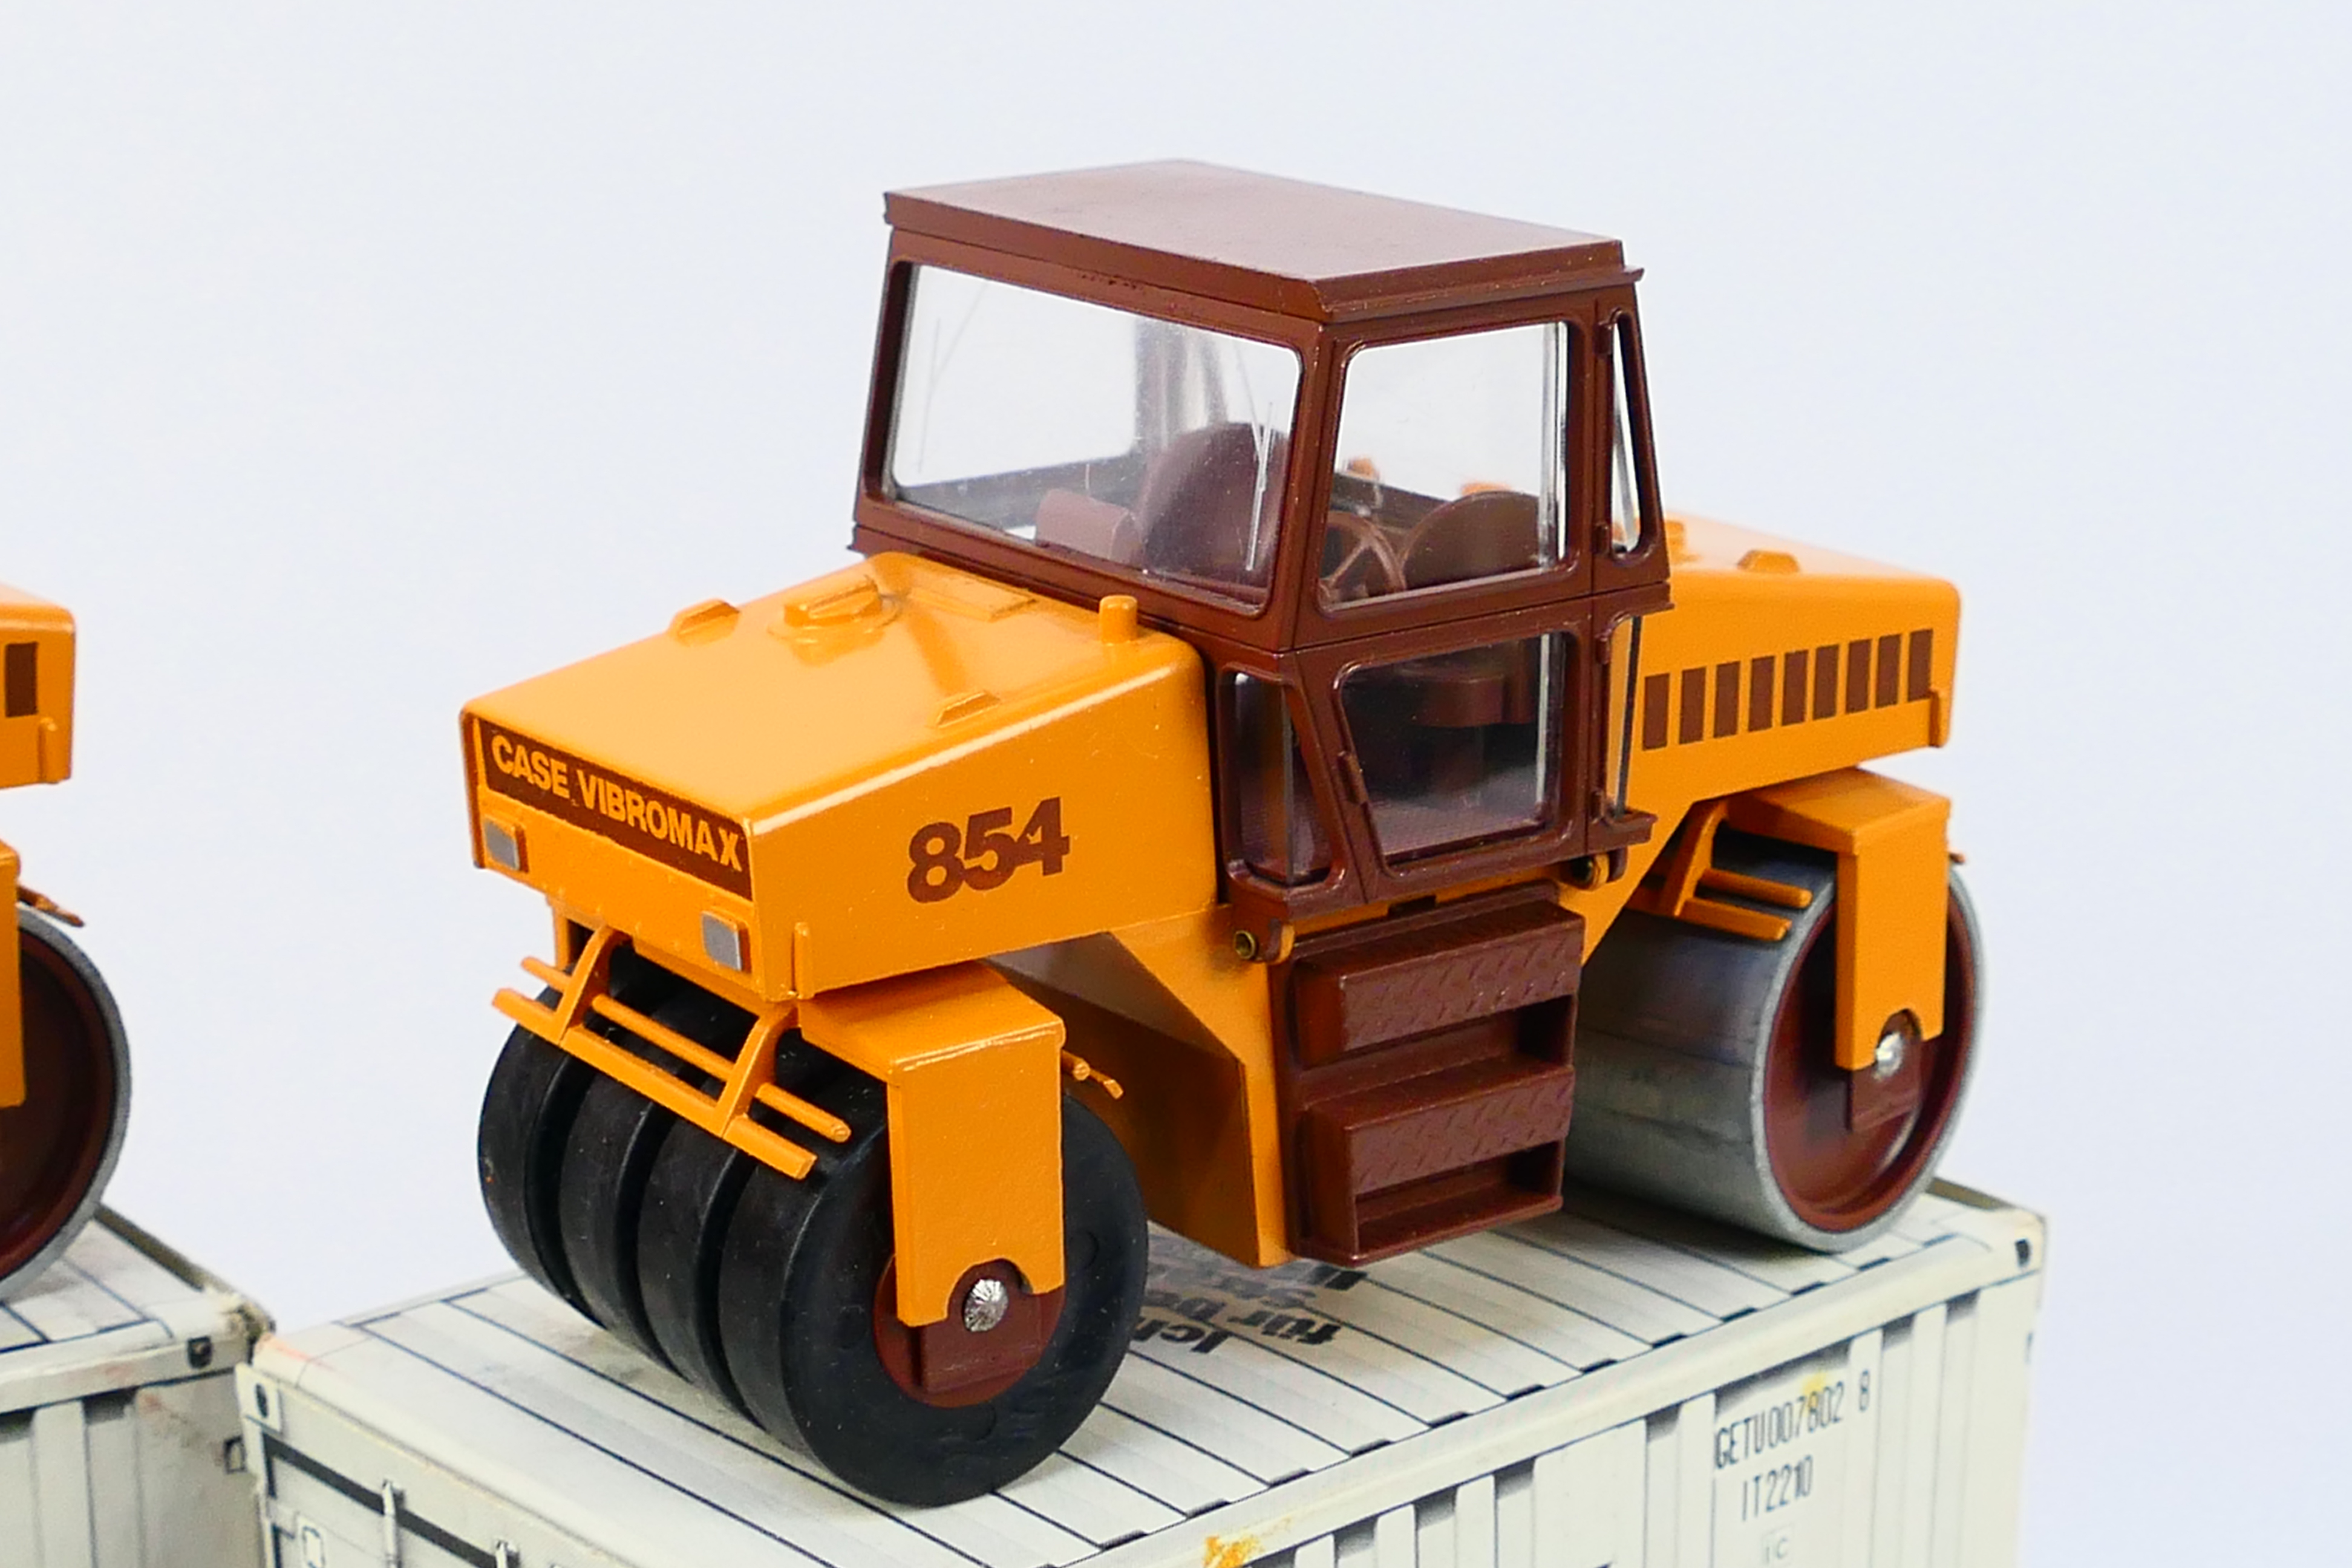 Conrad - 3 x Case construction vehicles in 1:35 scale, a Vibromax W854 roller # 2702, - Image 3 of 4